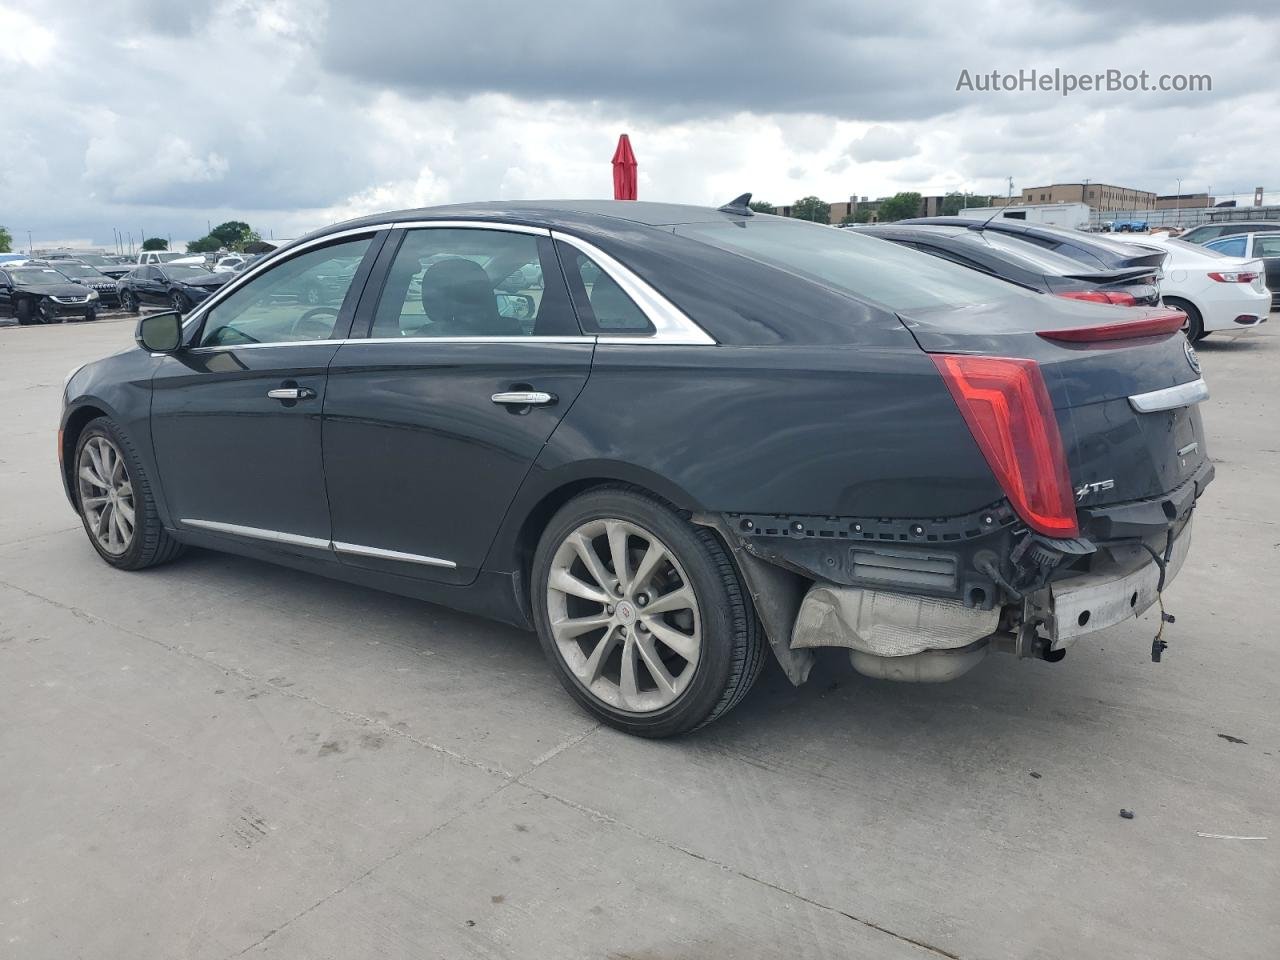 2013 Cadillac Xts Luxury Collection Black vin: 2G61P5S3XD9100996